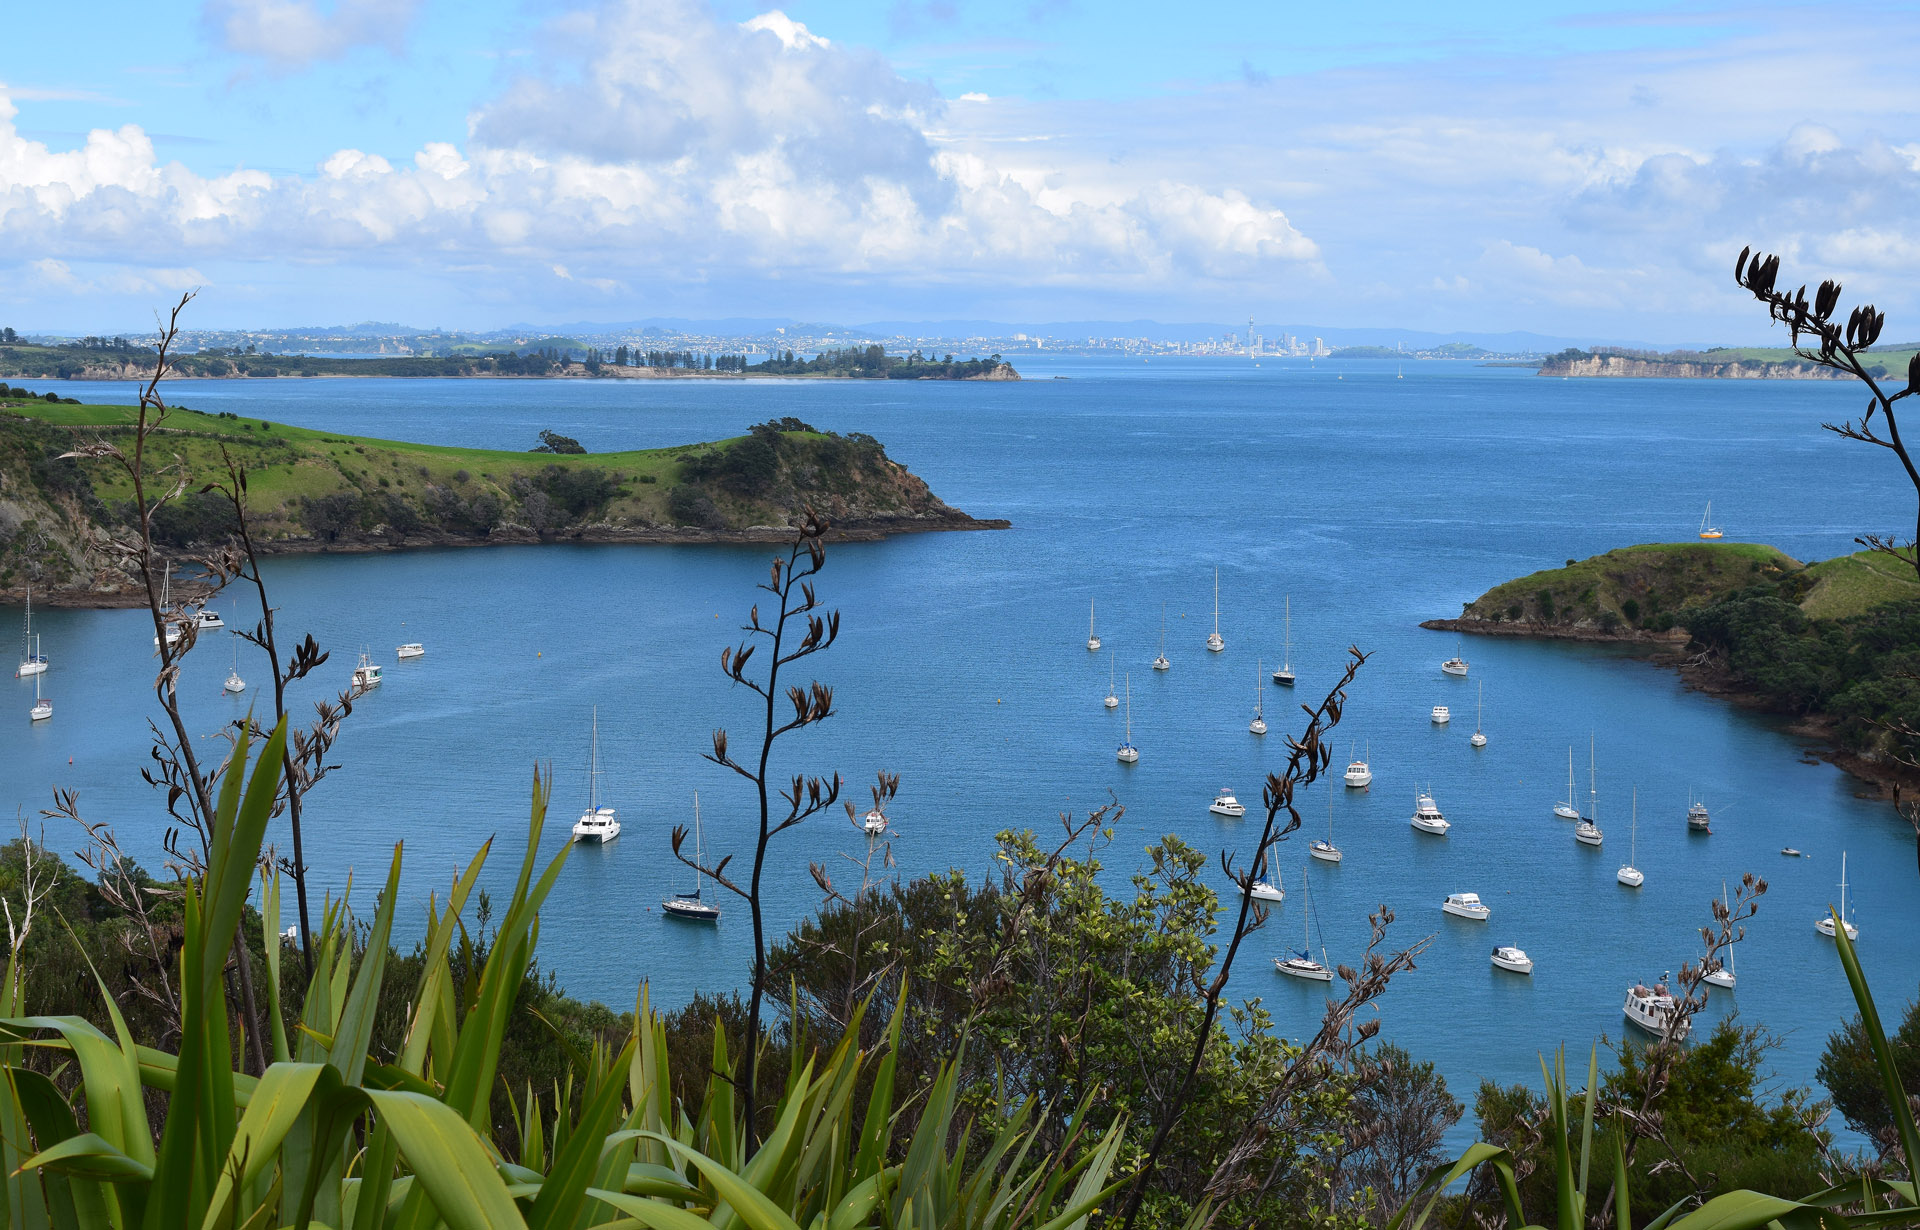 Terrific syrahs and Bordeaux blends are found on gorgeous Waiheke Island near Auckland, called "the island of wine" and popular with visitors who like to taste wine, dine, hike and bike.